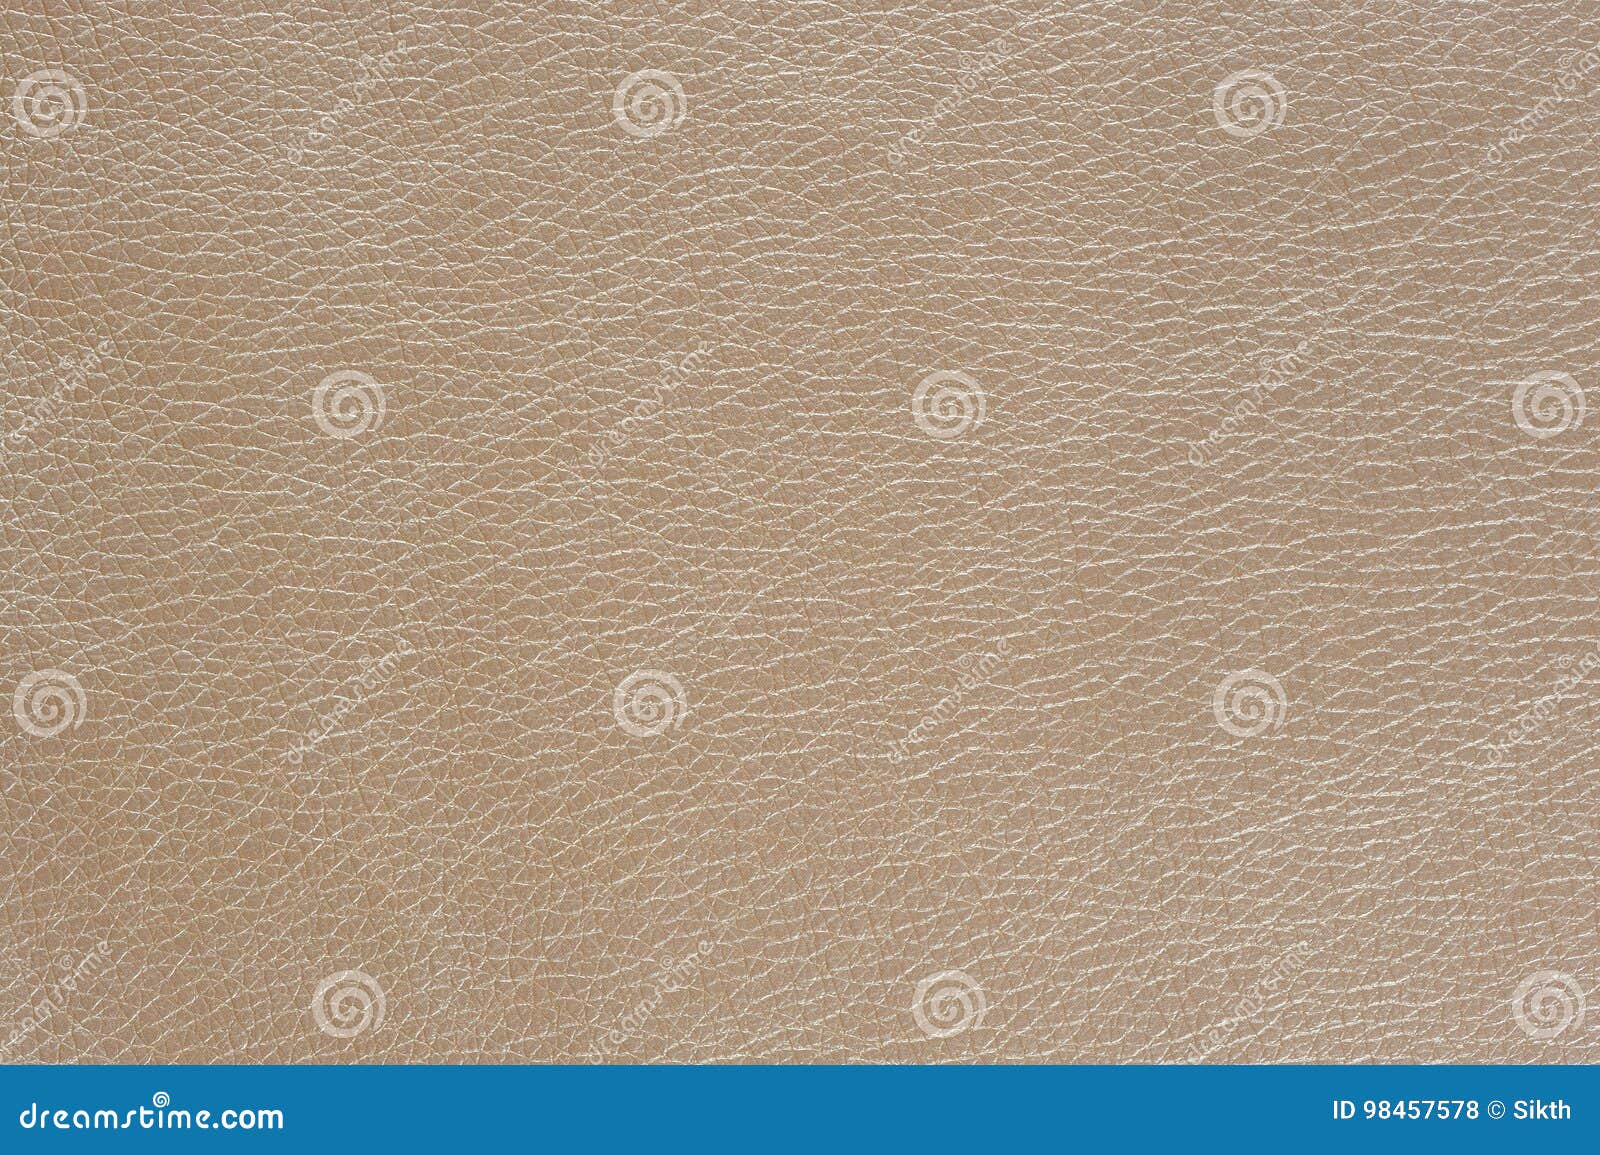 Beige Glossy Artificial Leather Background Texture Stock Photo - Image ...